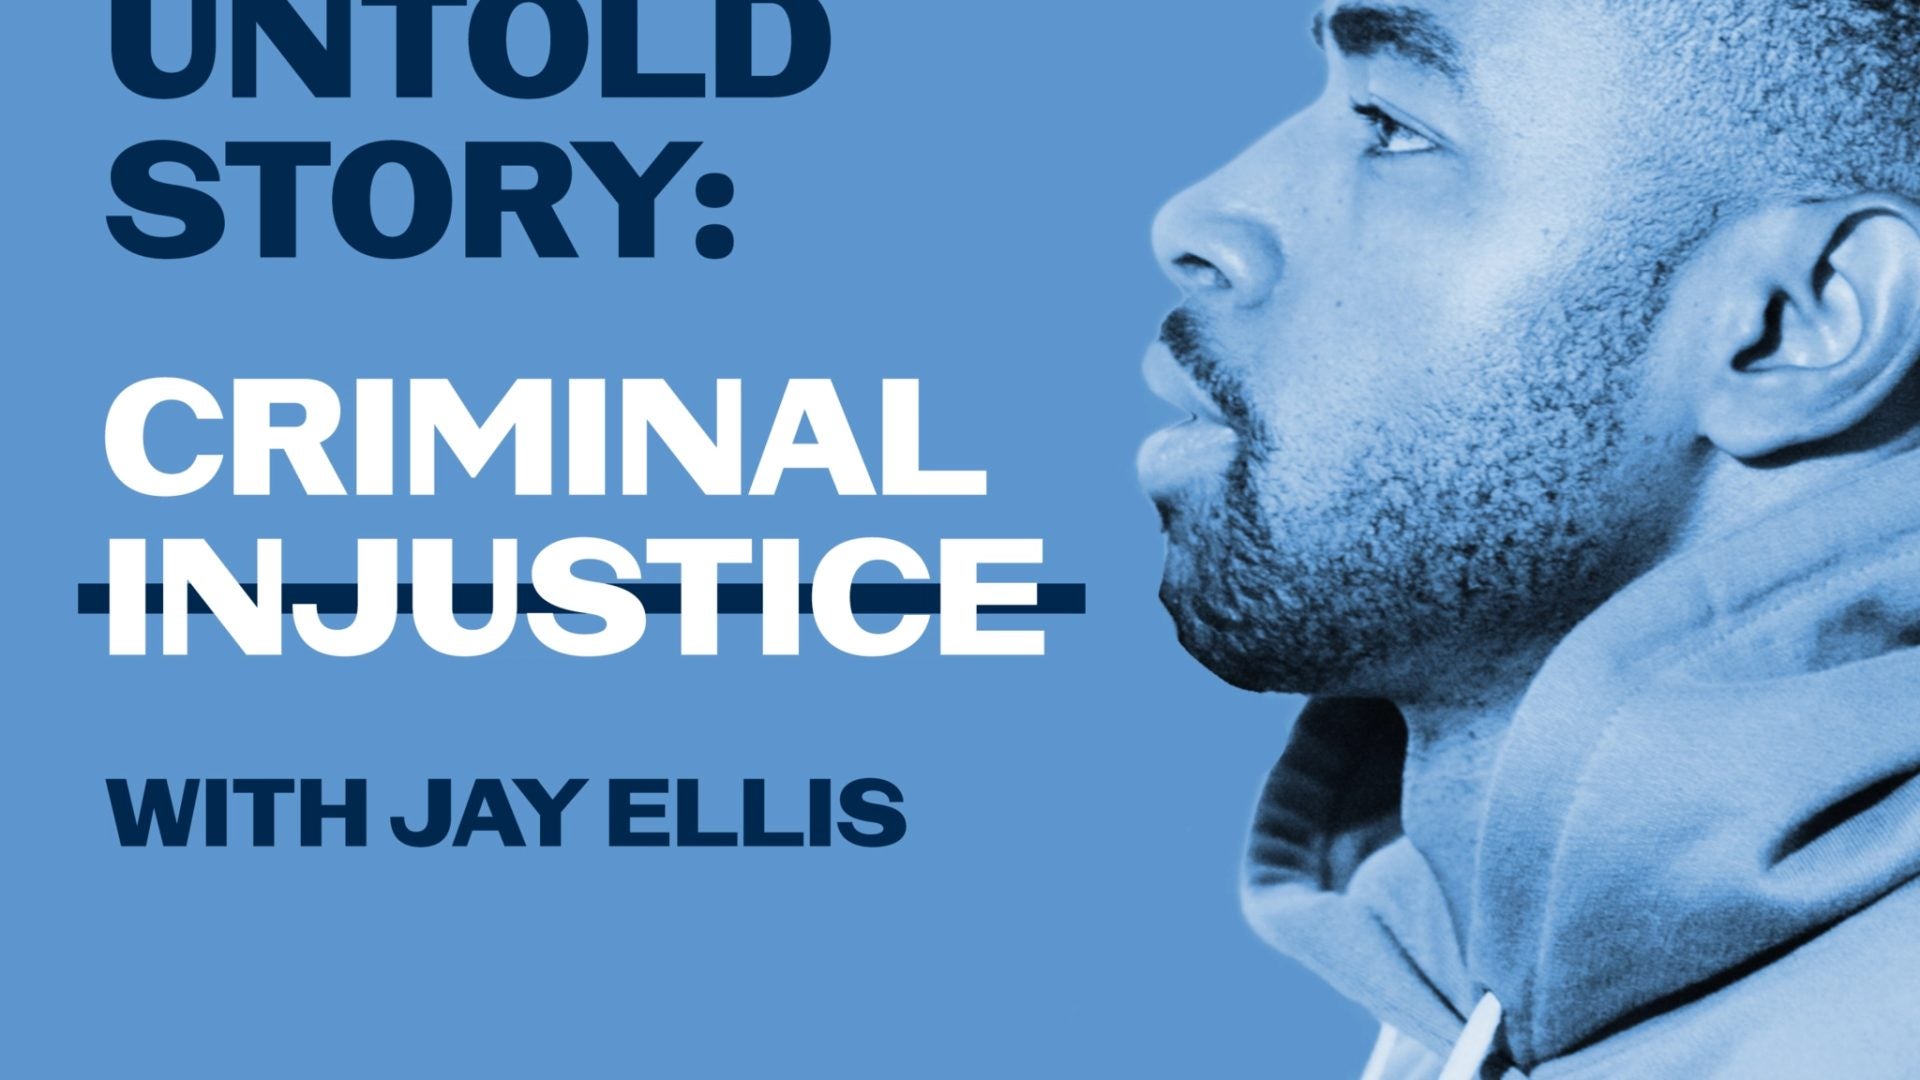 Jay Ellis Confronts The Criminal Justice System In Season 2 Of "The Untold Story" Podcast